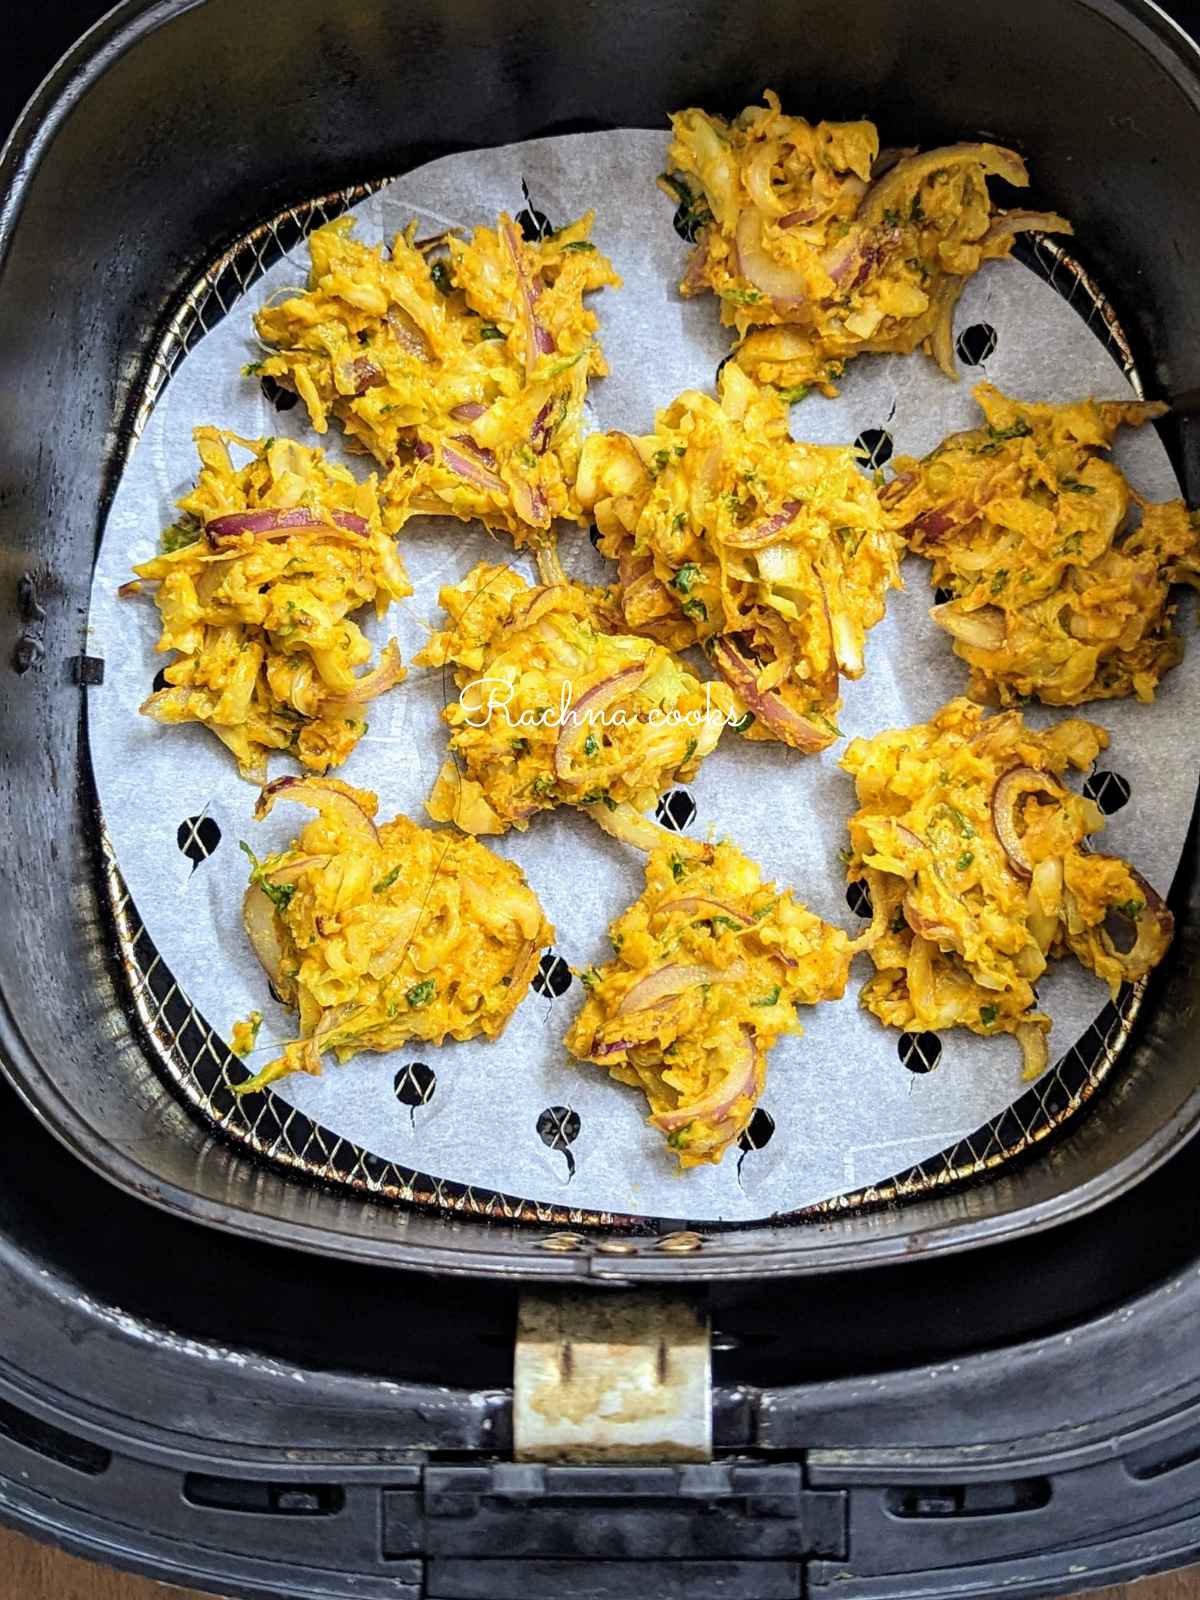 Cabbage pakodas placed on perforated parchment paper in air fryer basket ready for air frying.